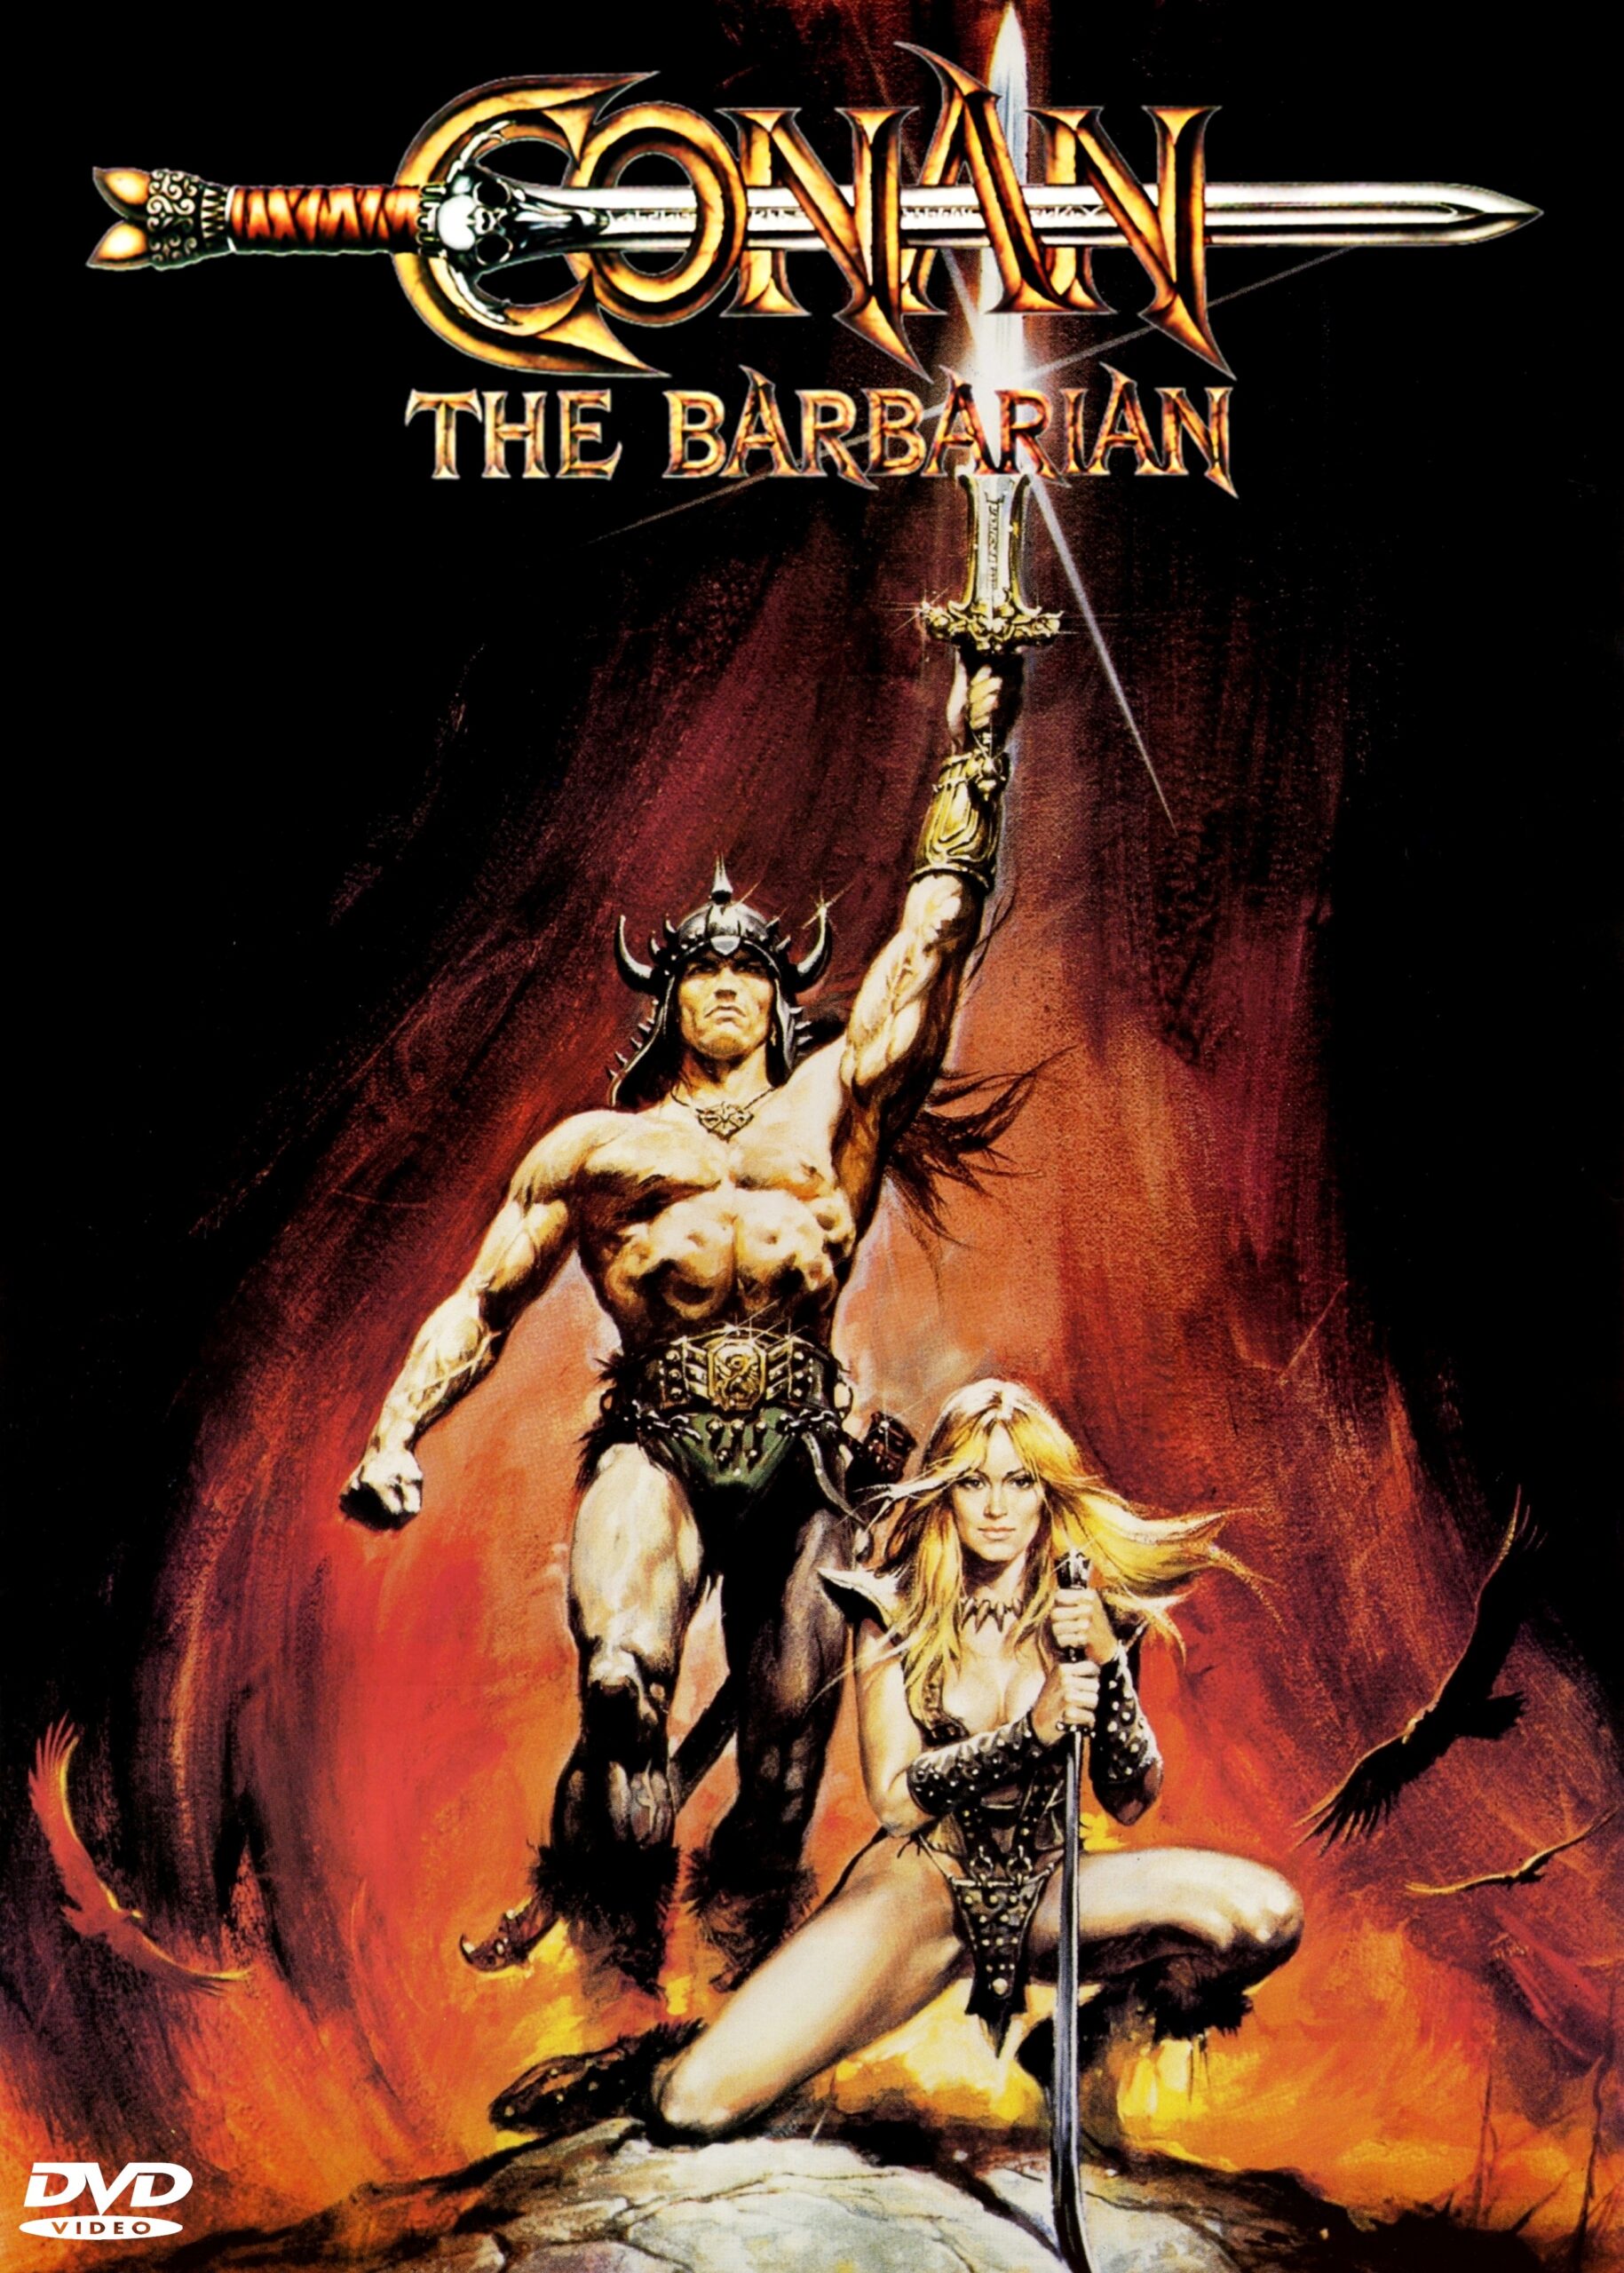 Conan The Barbarian TV Series In Works At Netflix